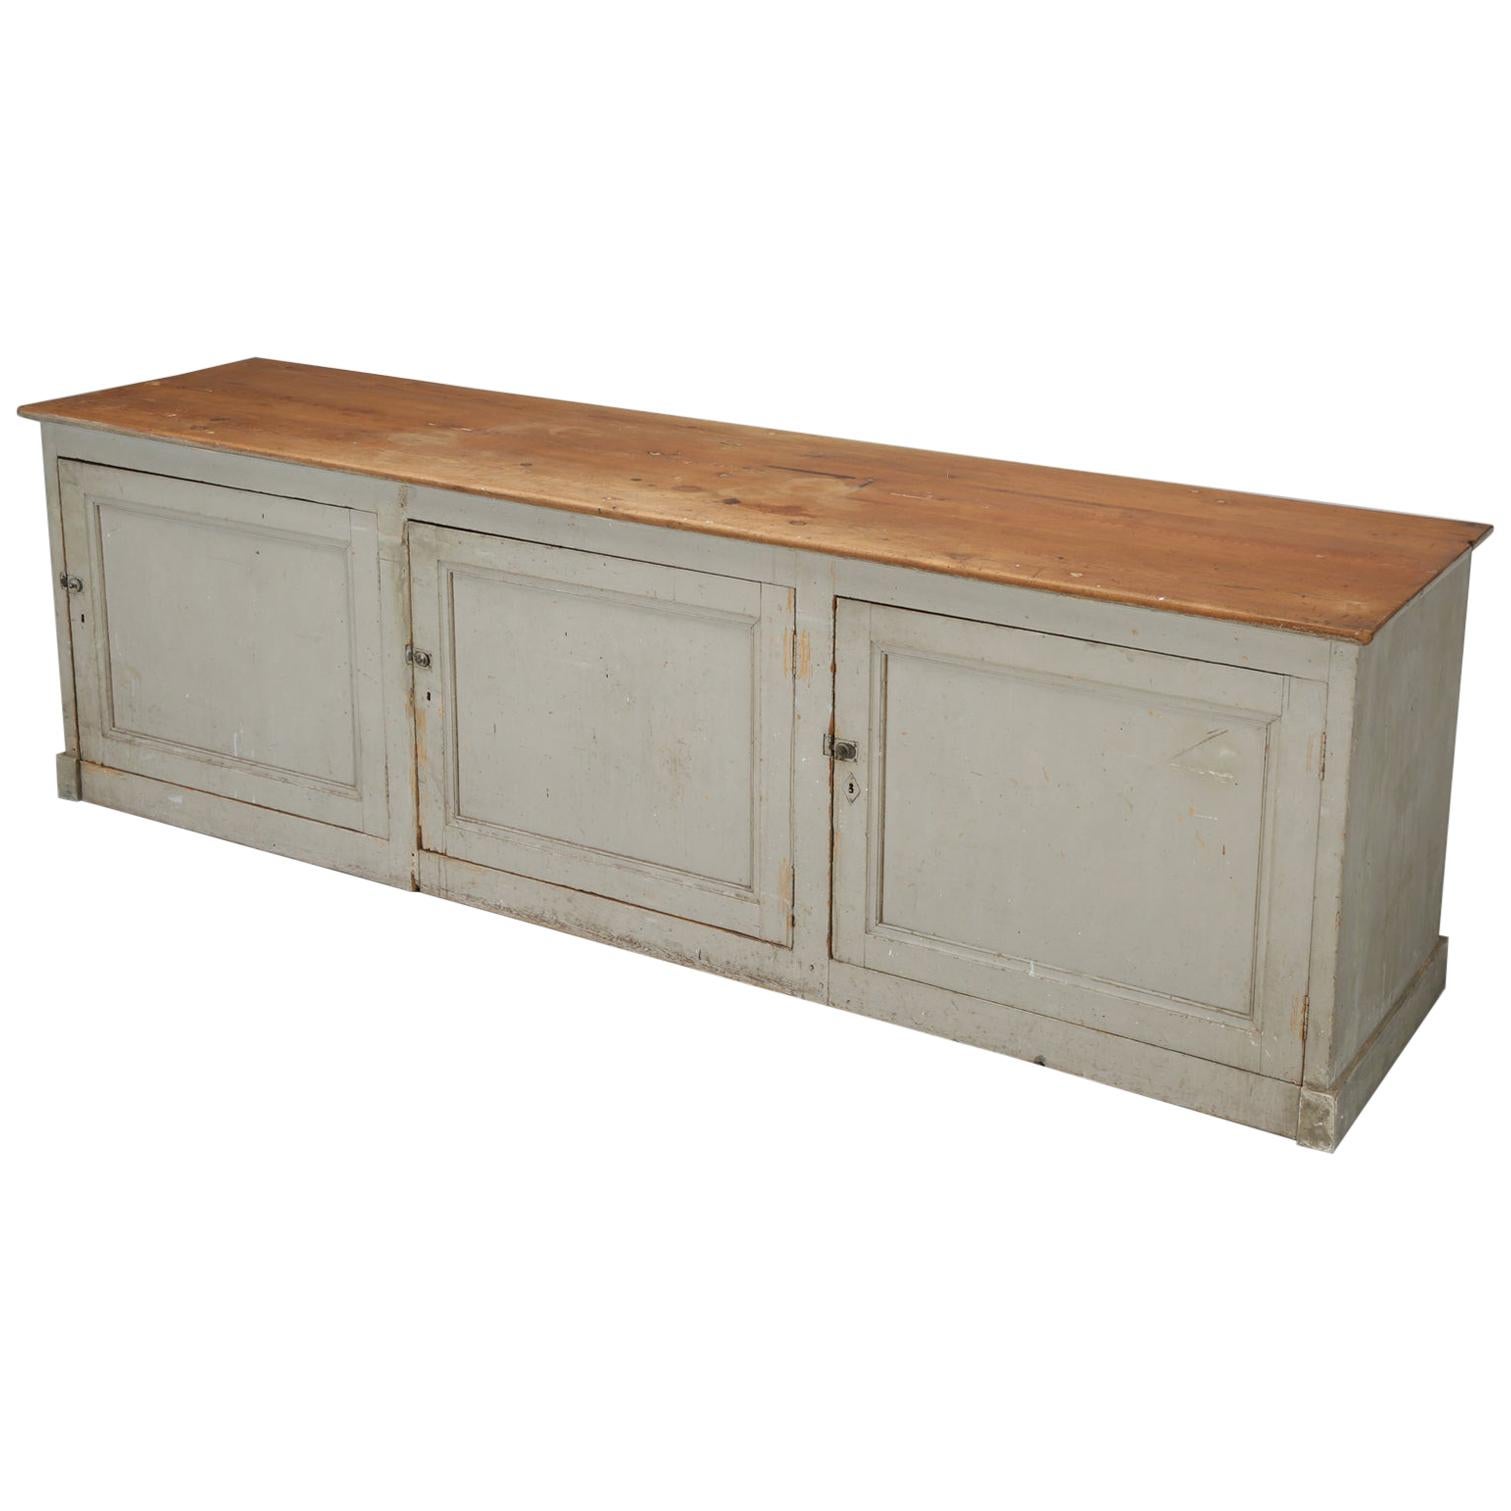 Antique French Store Counter or Kitchen Island in Original Paint, Unrestored